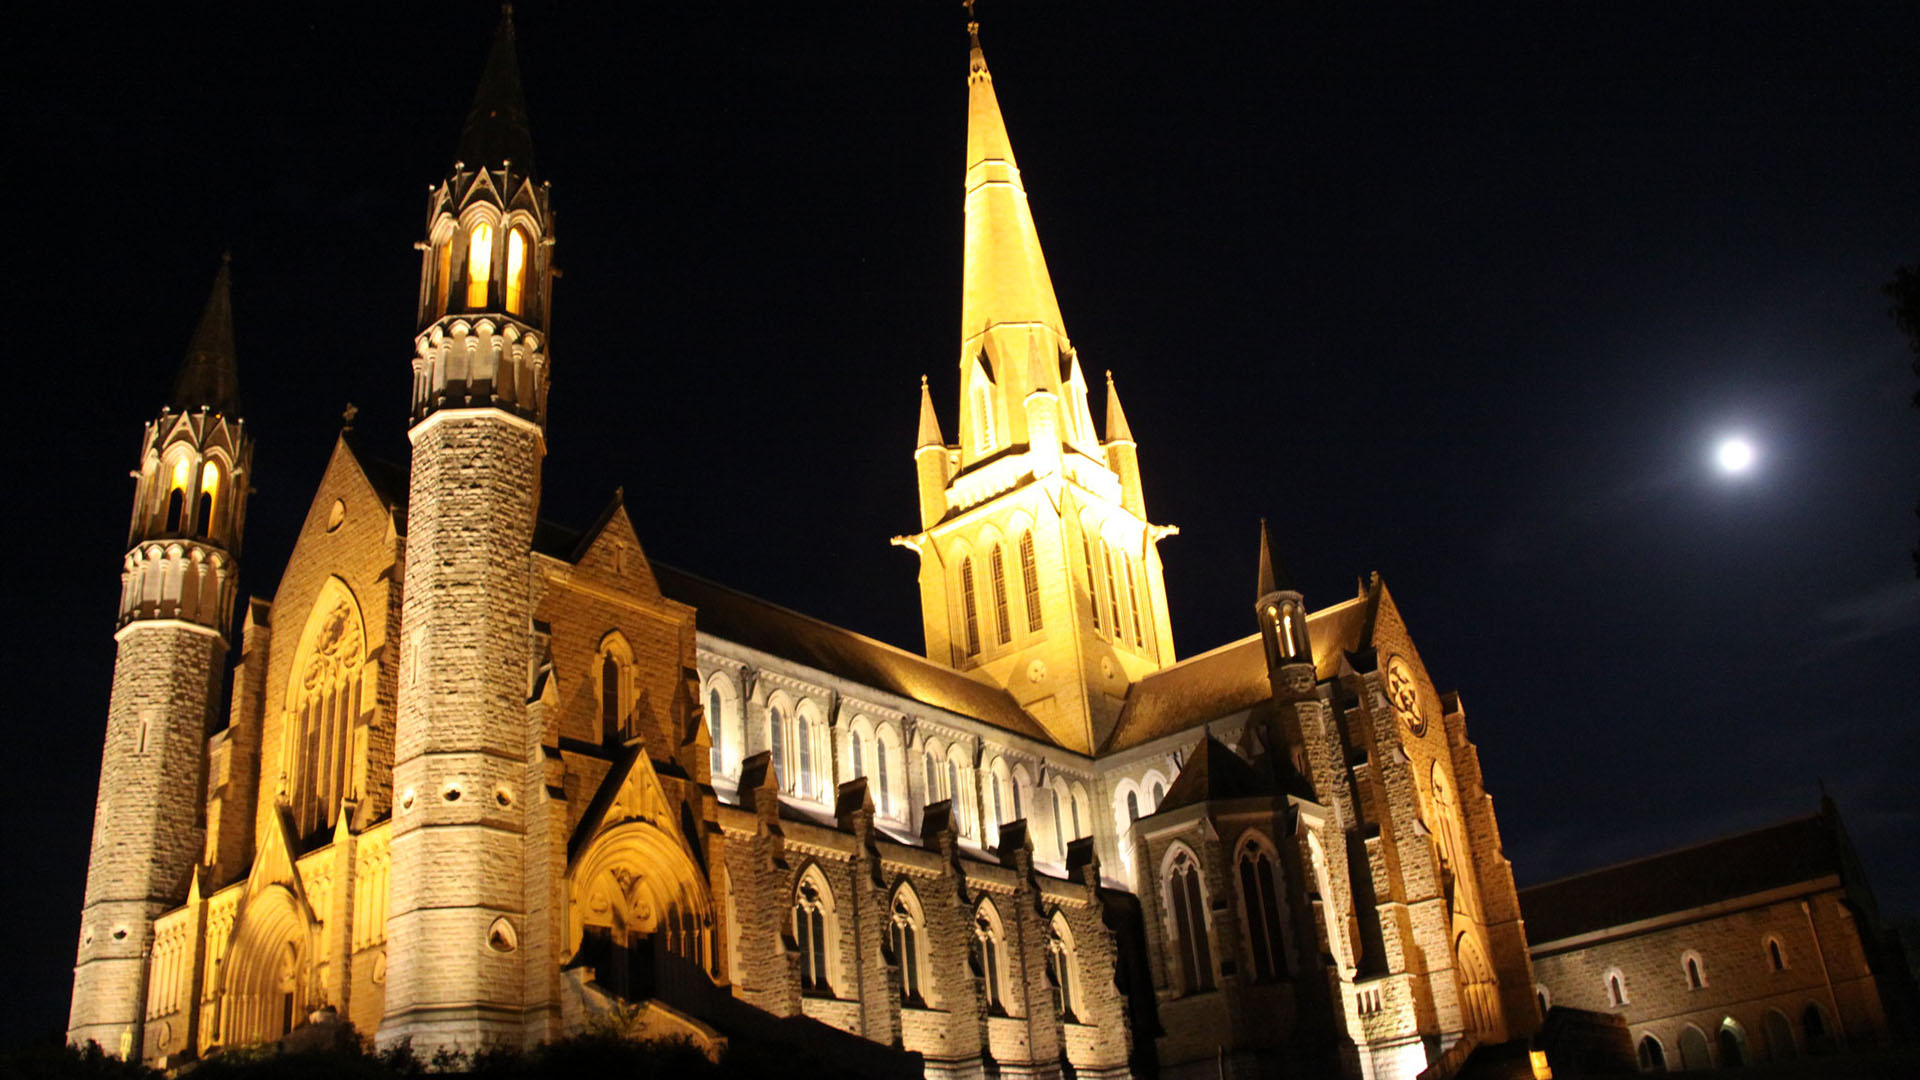 Image is of a gothic cathedral illuminated at night in Bendigo Victoria